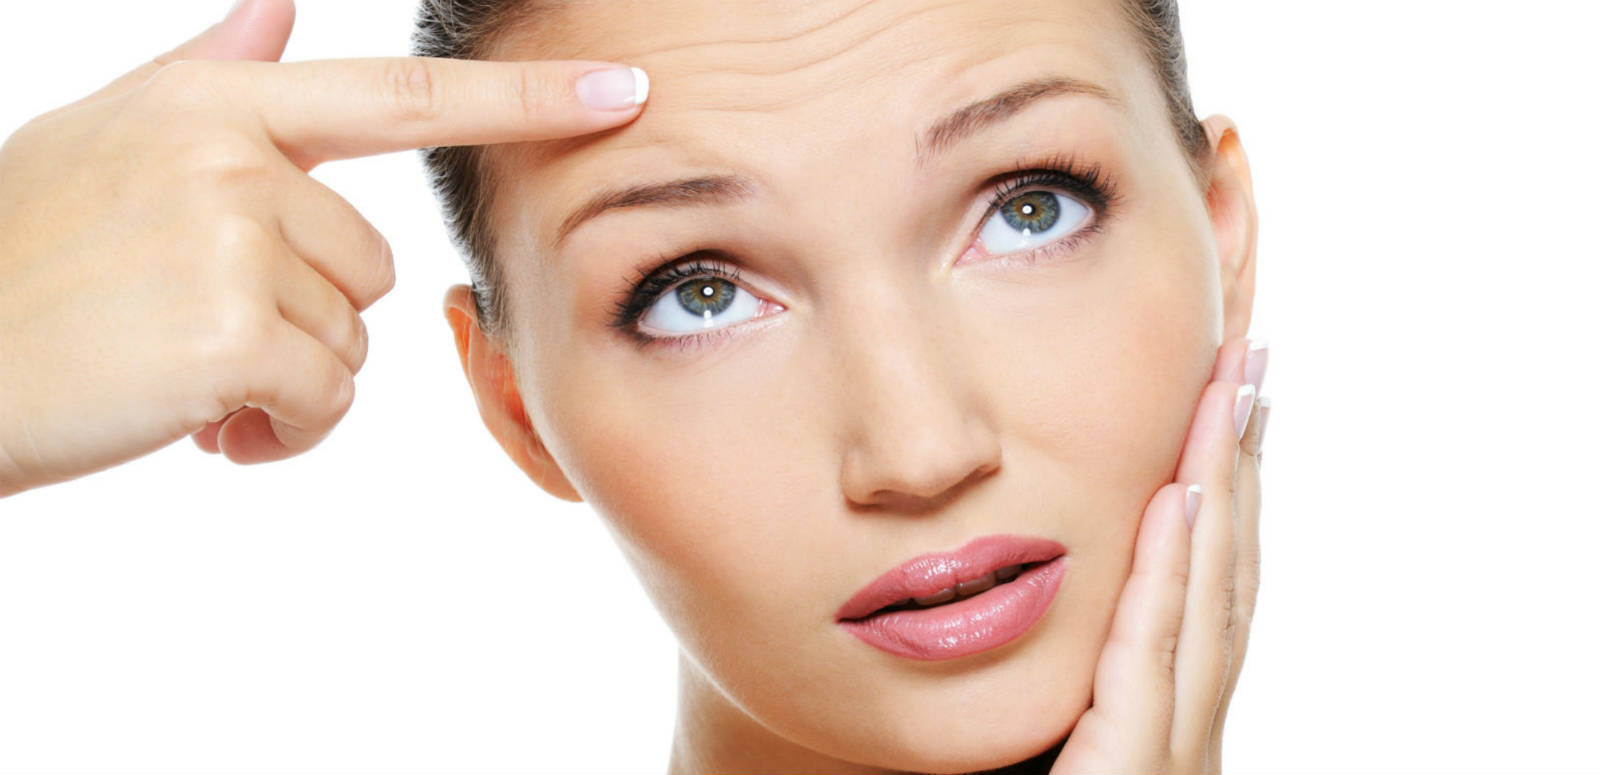 Skin Care Tips for Wrinkles-Free Baby Face